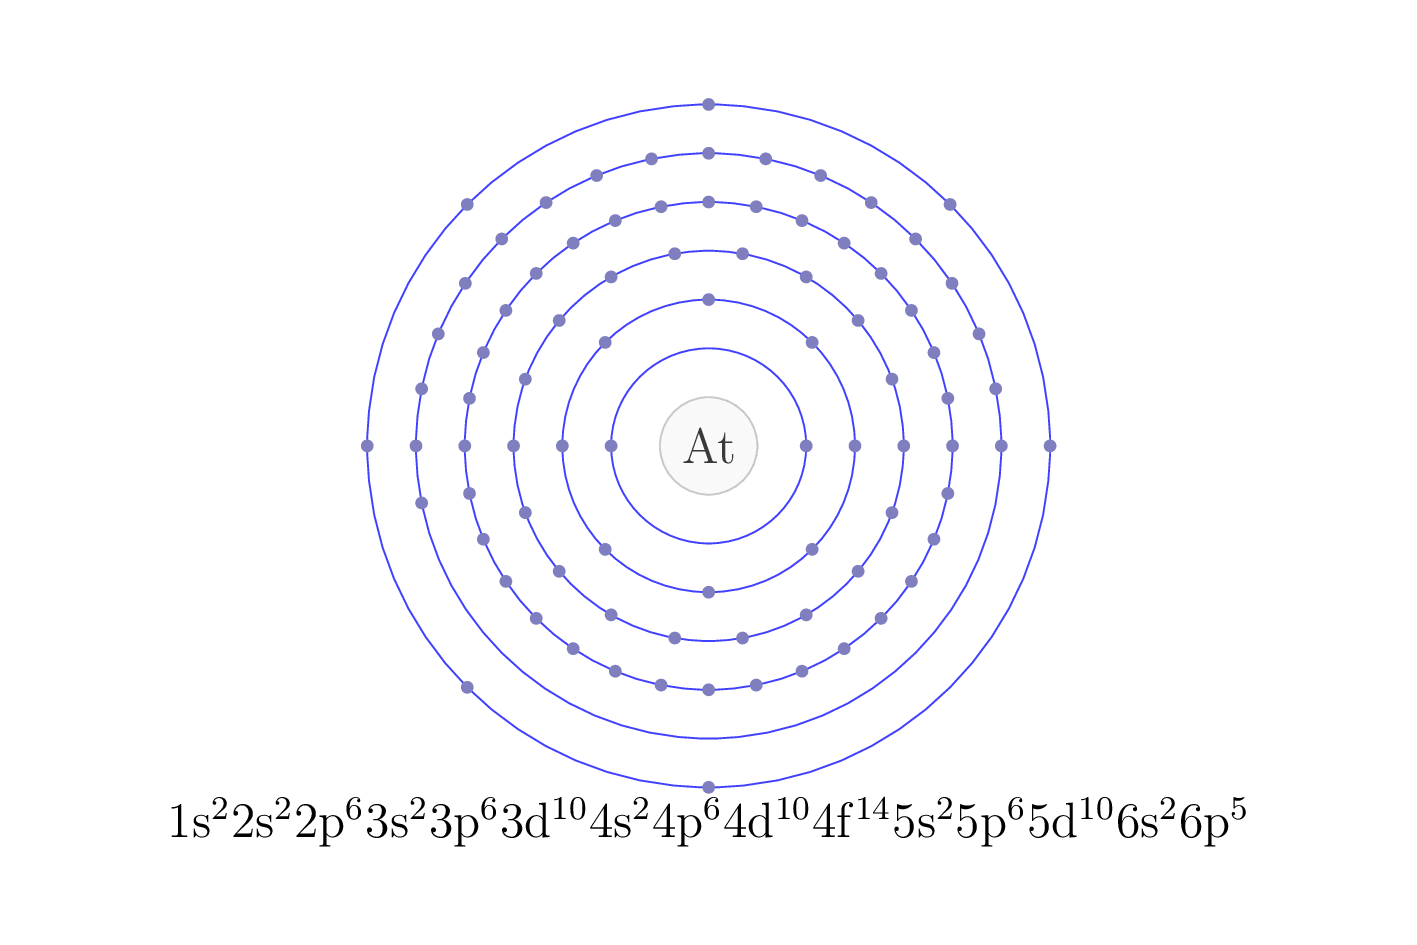 electron configuration of element At